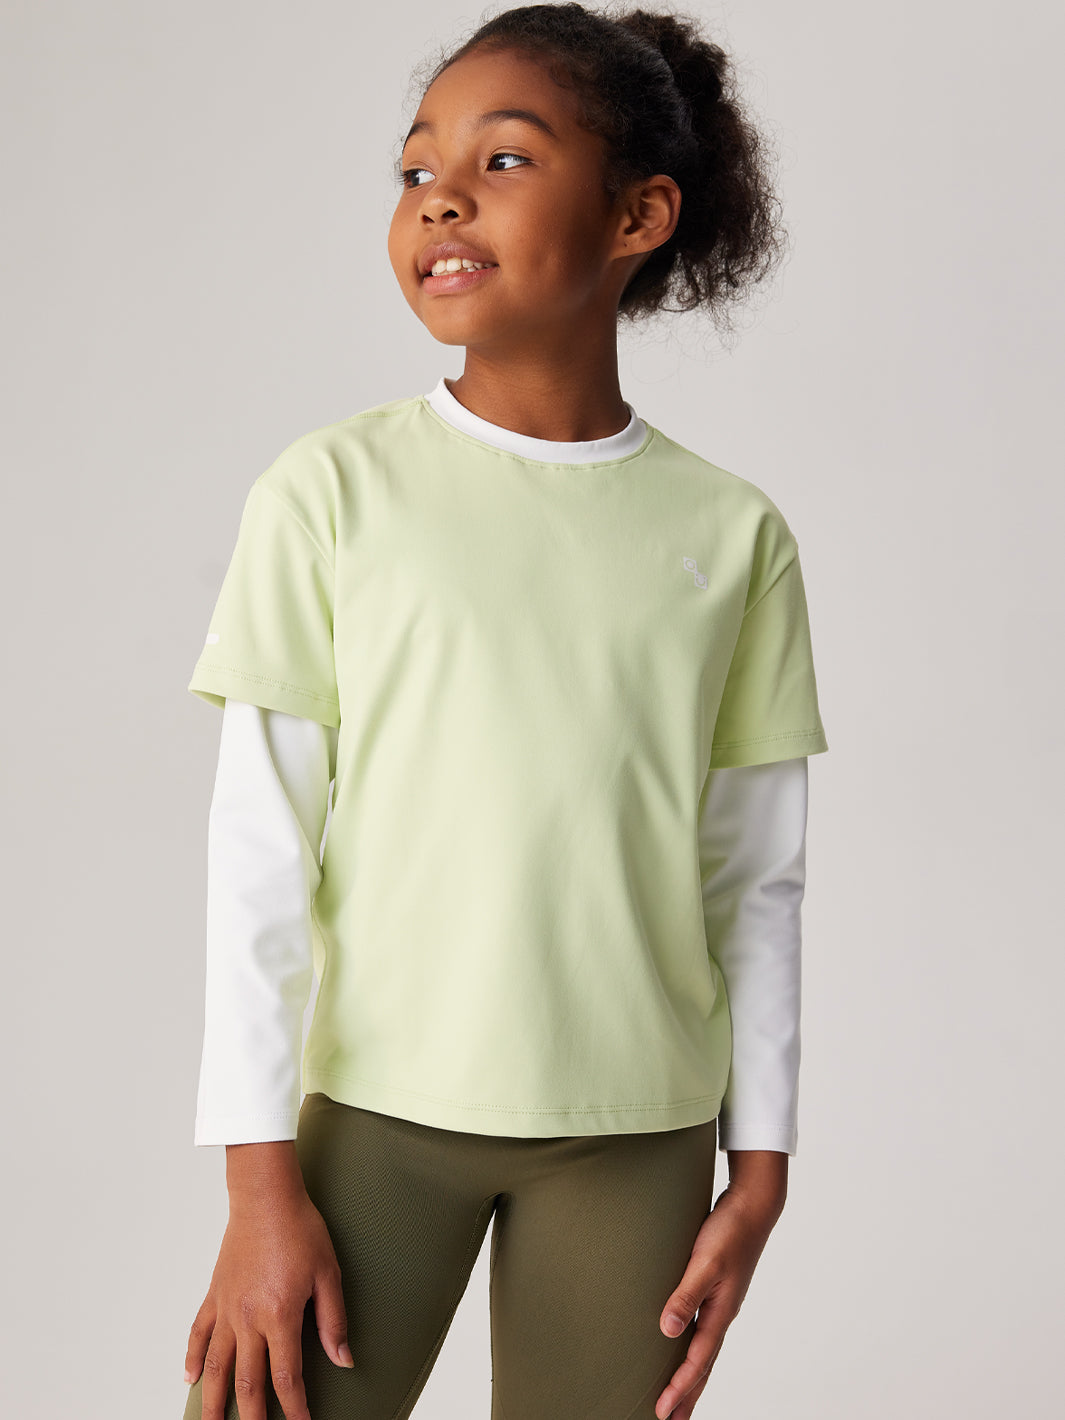 Cotton  2 in 1 Long Sleeve Shirt